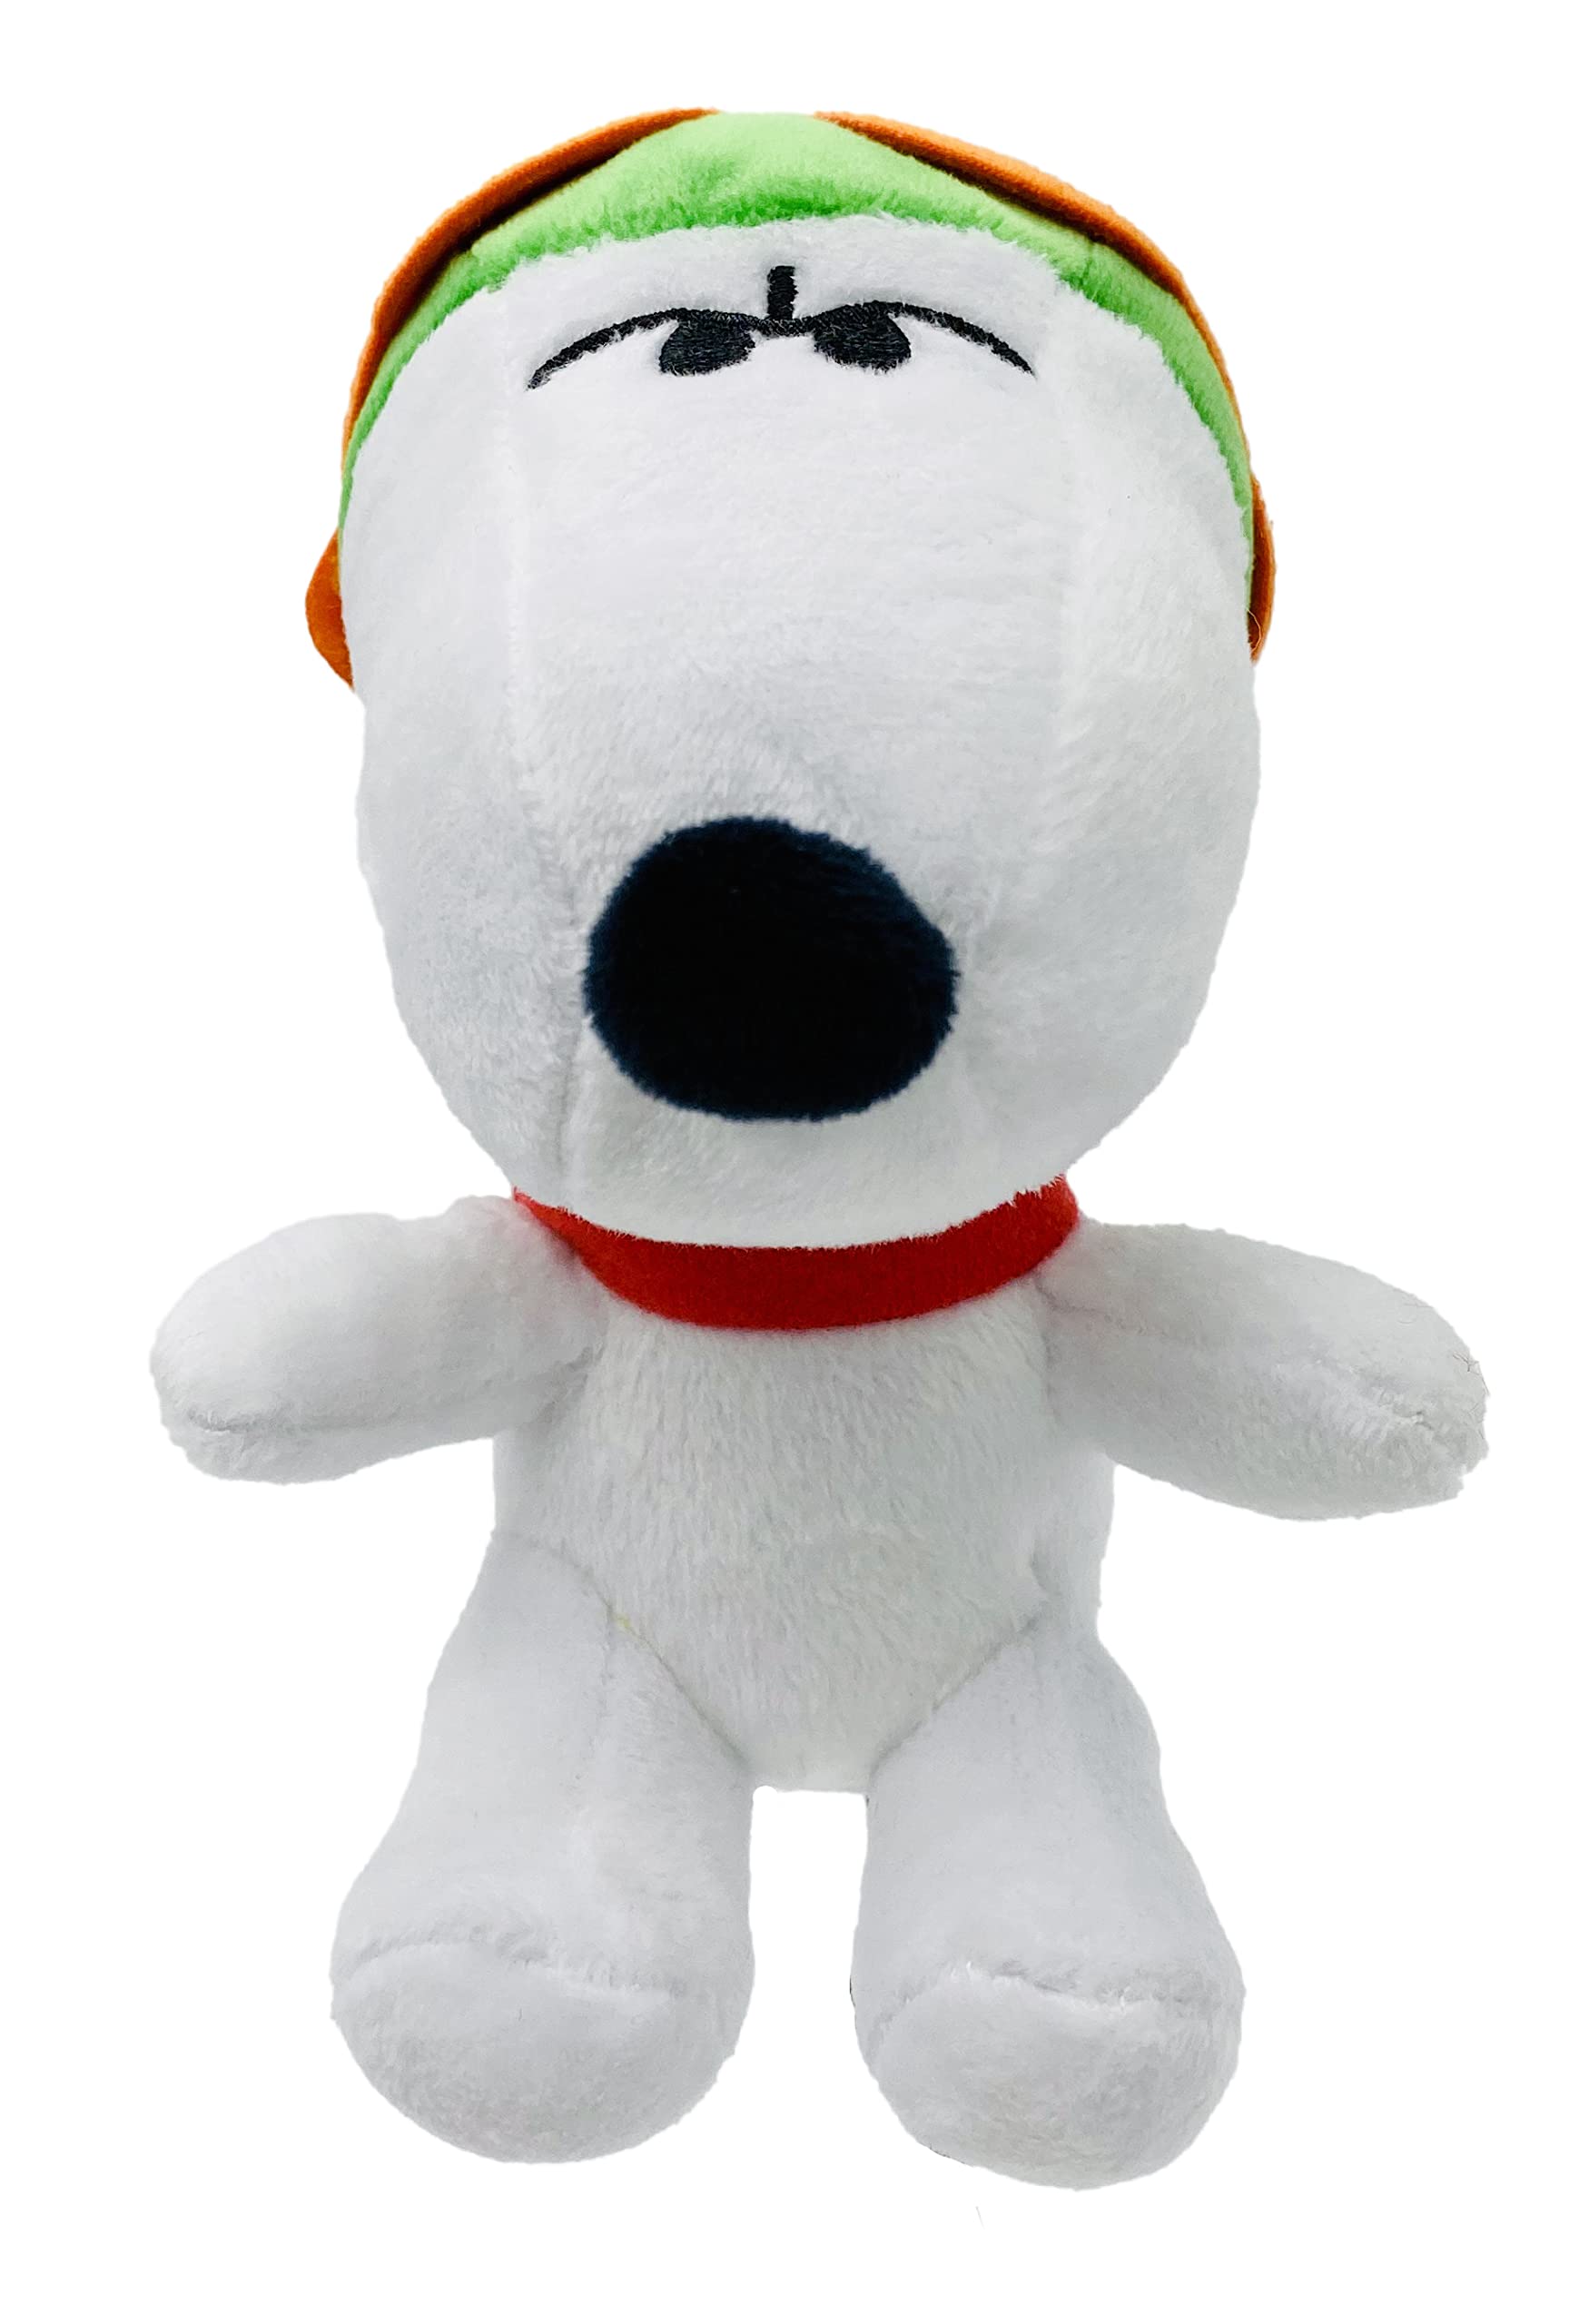 JINX Official Peanuts Collectible Plush Snoopy, Excellent Plushie Toy for Toddlers & Preschool, Super Cute Flying Ace